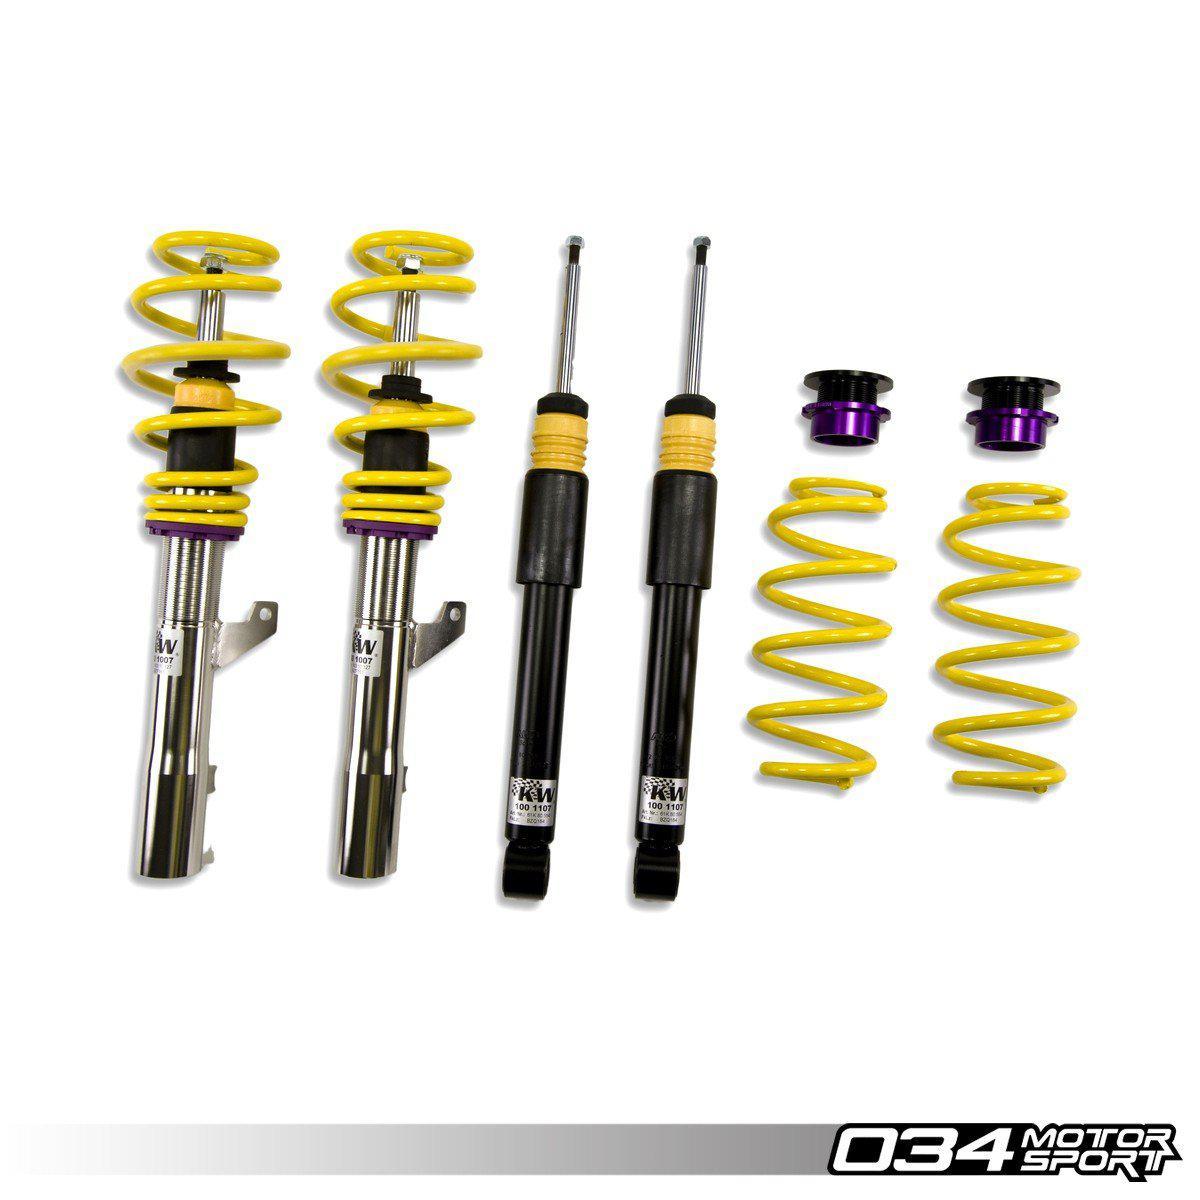 KW Variant 1 Coilover Suspension, C5 Audi RS6 4.2t Quattro-A Little Tuning Co